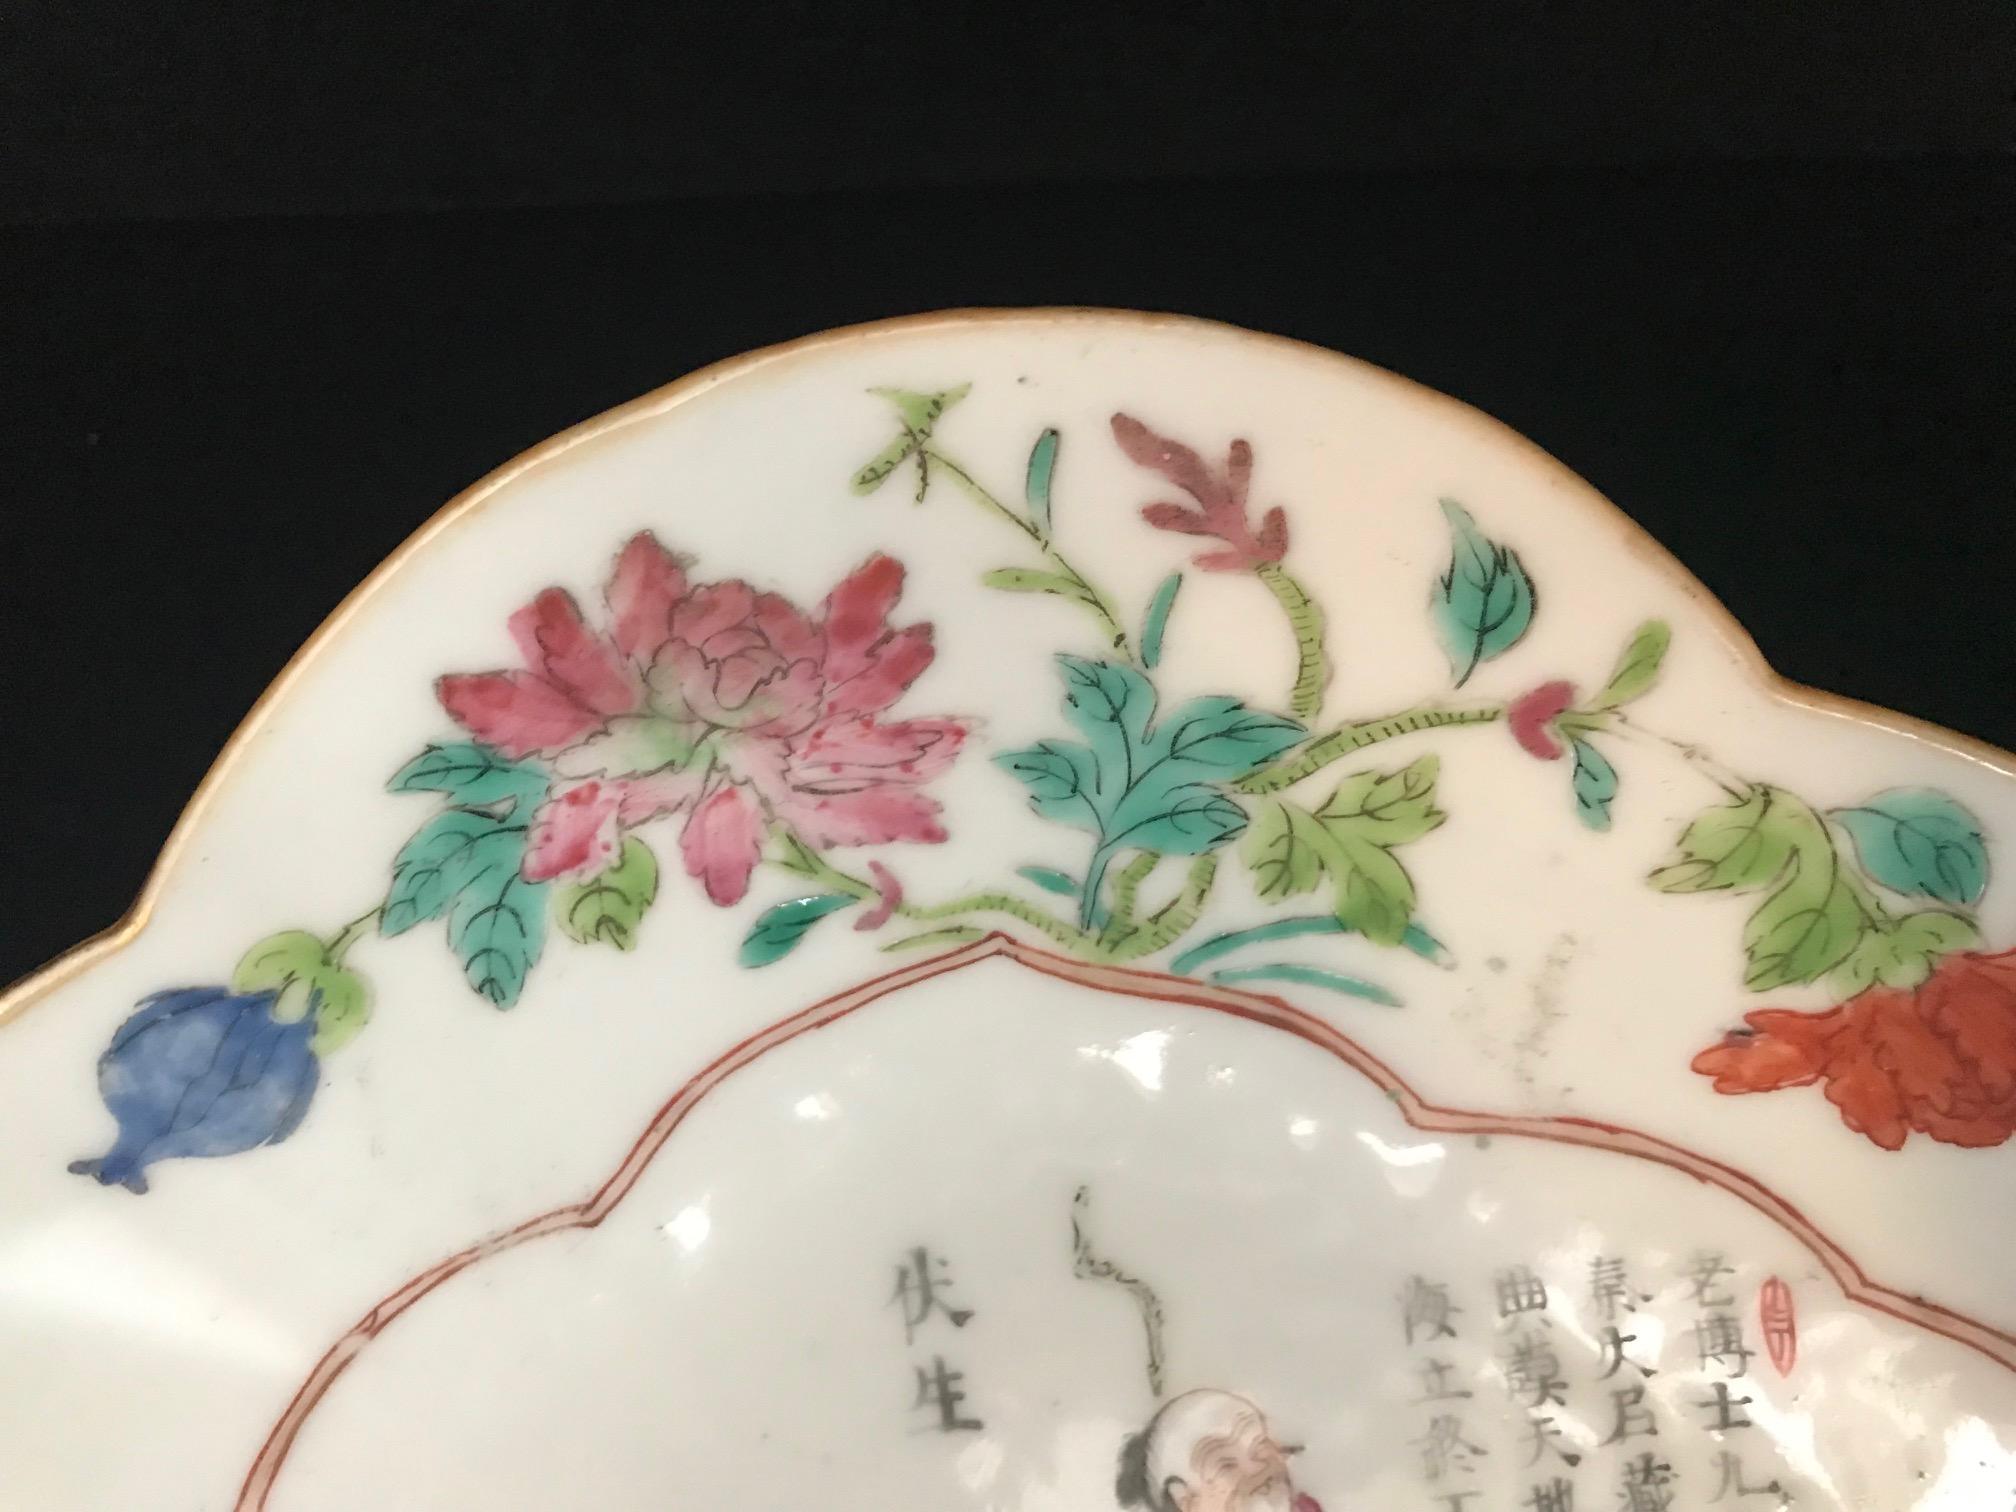 Porcelain 19th Century Chinese Famille Rose “Wu Shuang Pu“ Pedestal Bowl, Qing Dynasty